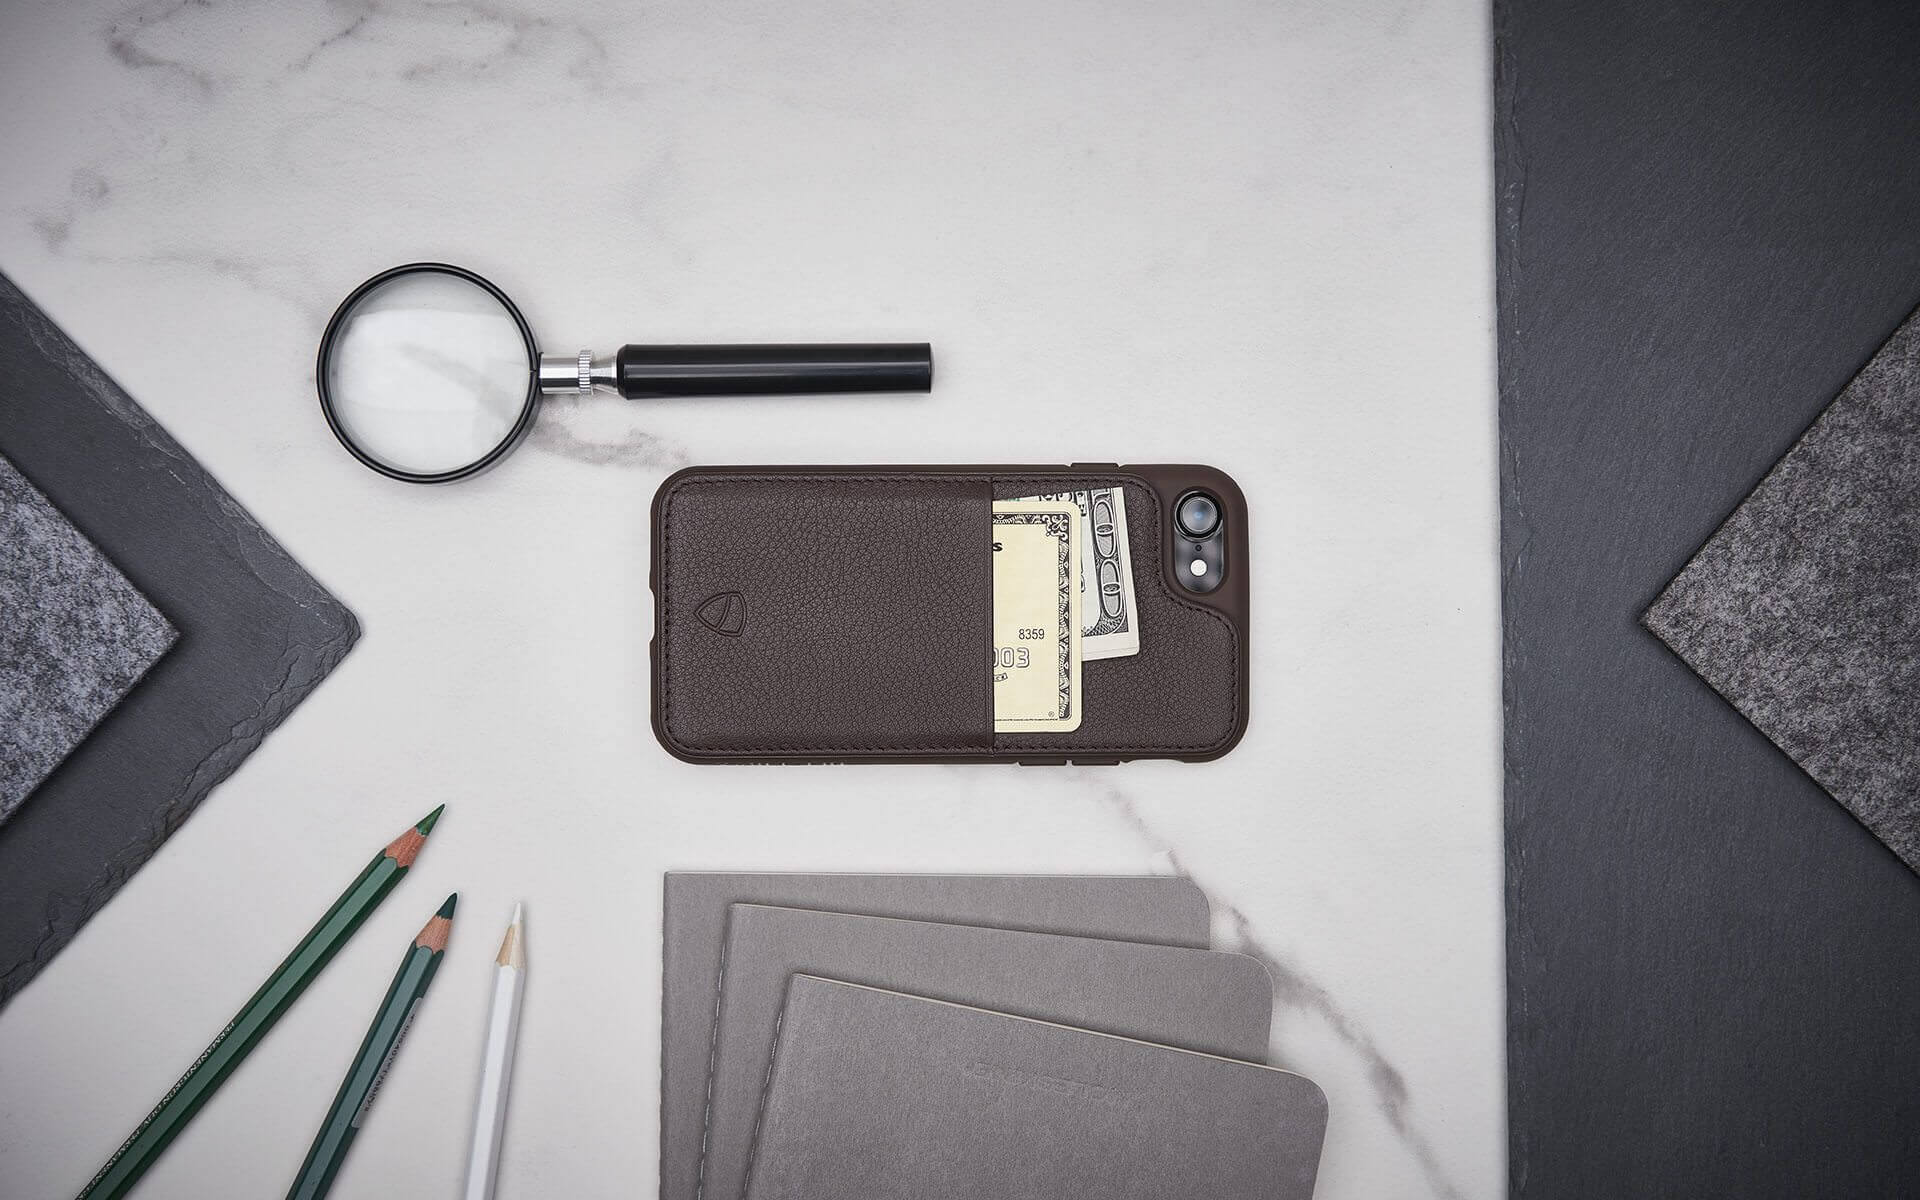 Modern Leather iPhone 7 Case